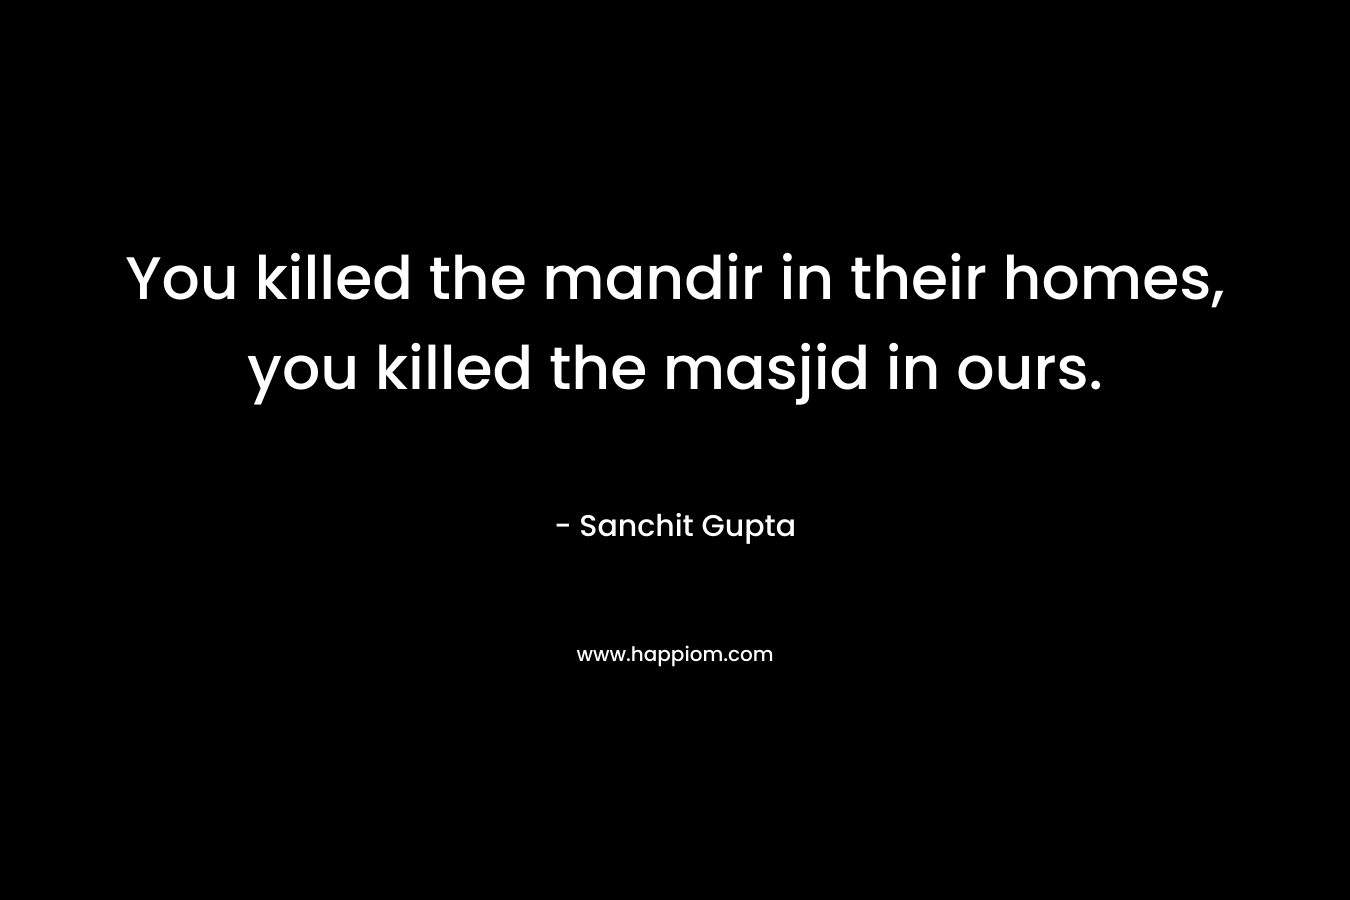 You killed the mandir in their homes, you killed the masjid in ours. – Sanchit Gupta